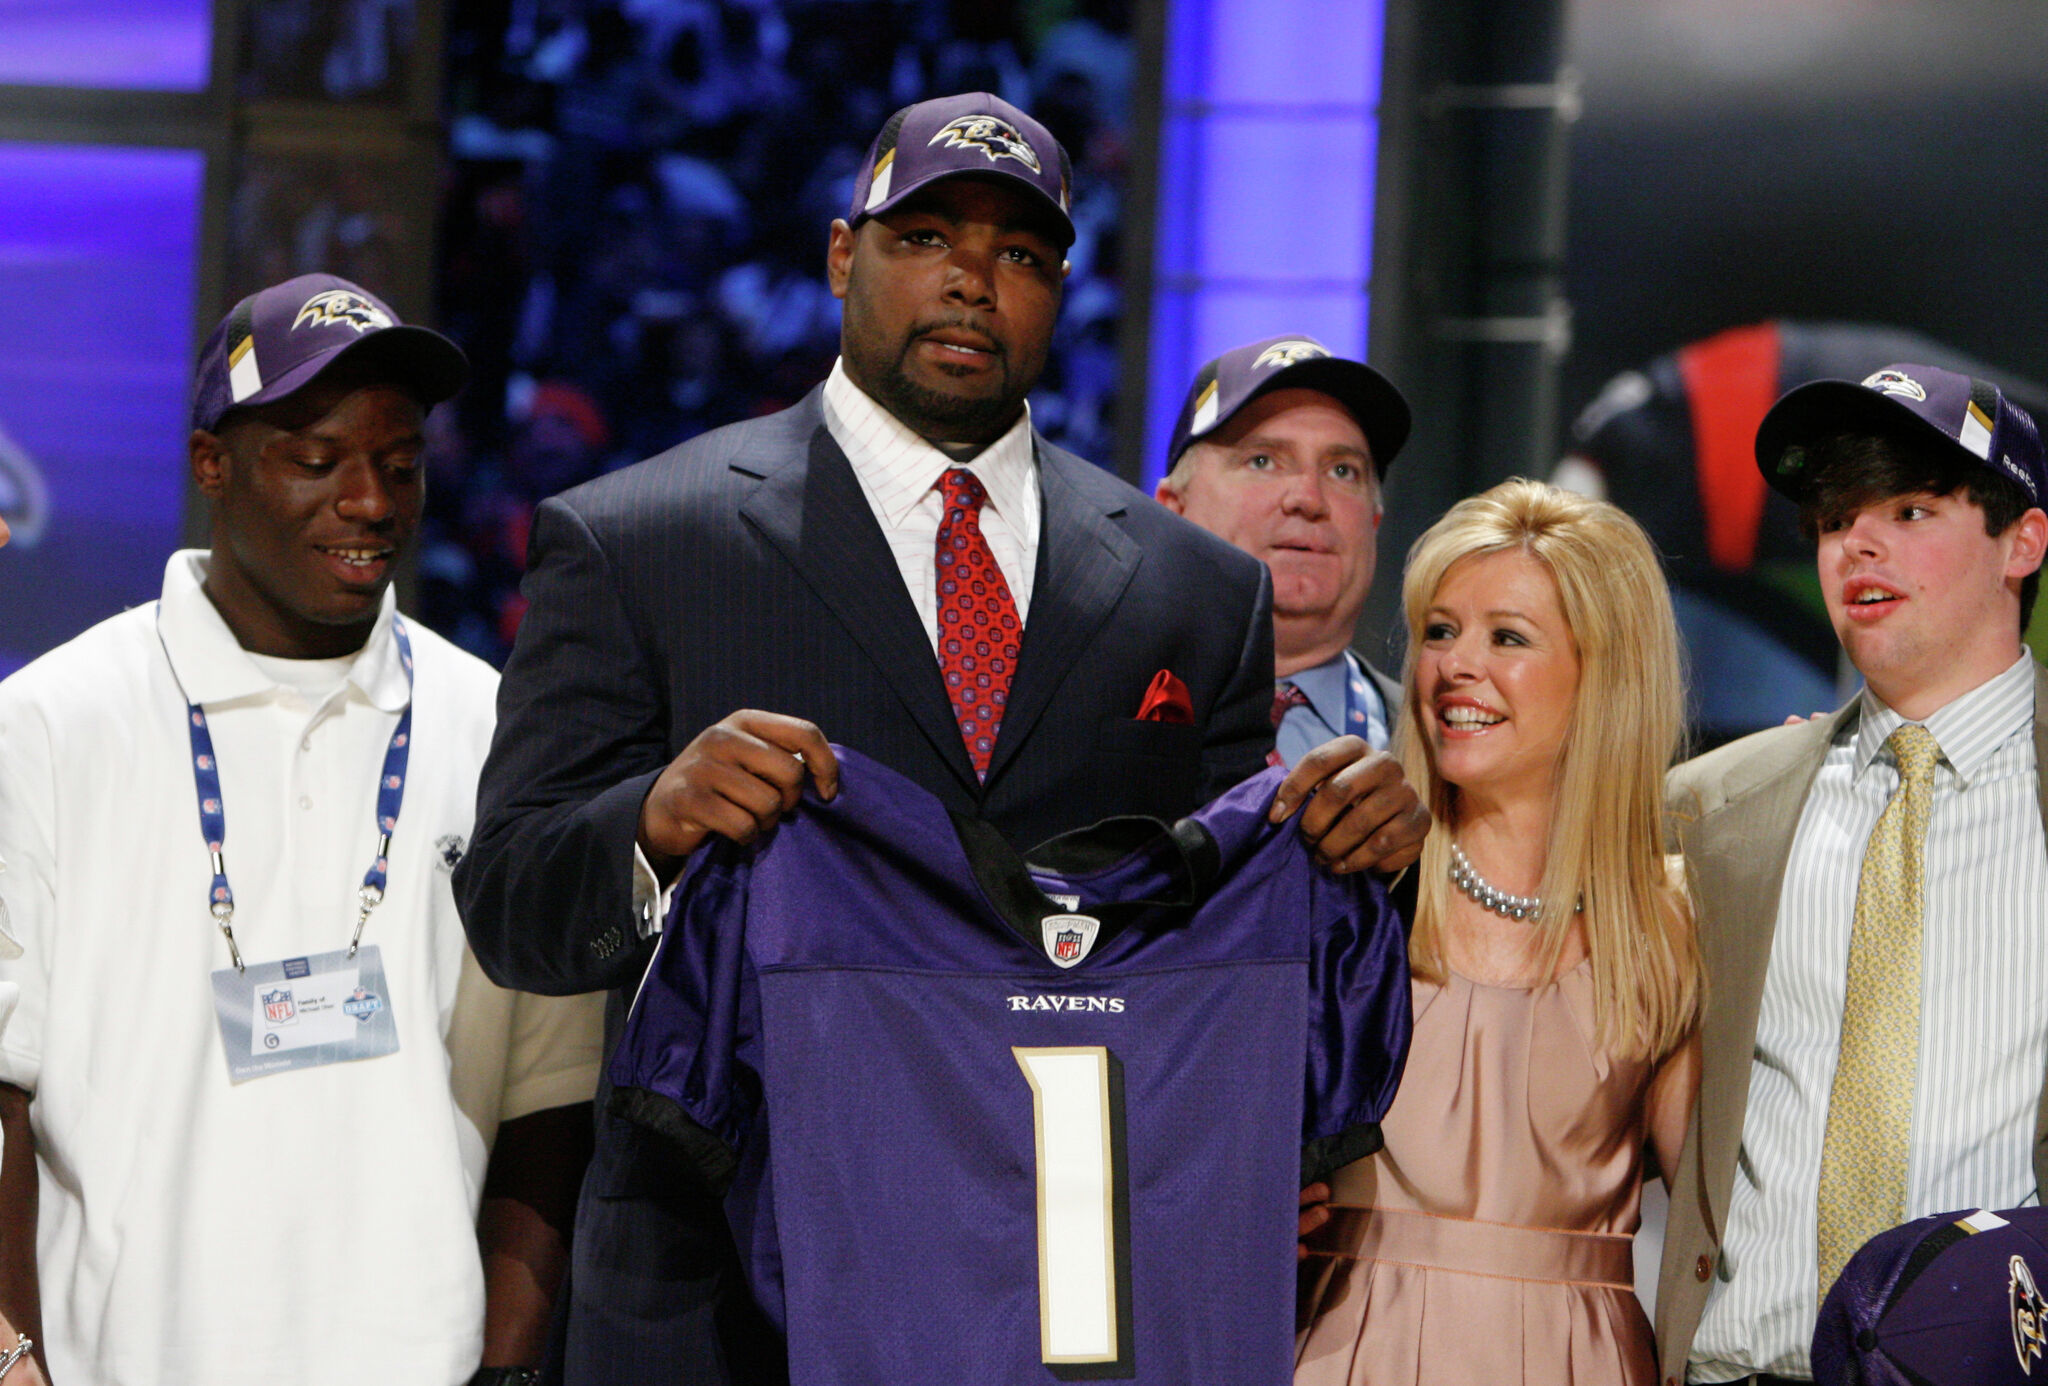 Berkeley's Michael Lewis defends 'Blind Side' family Michael Oher sued